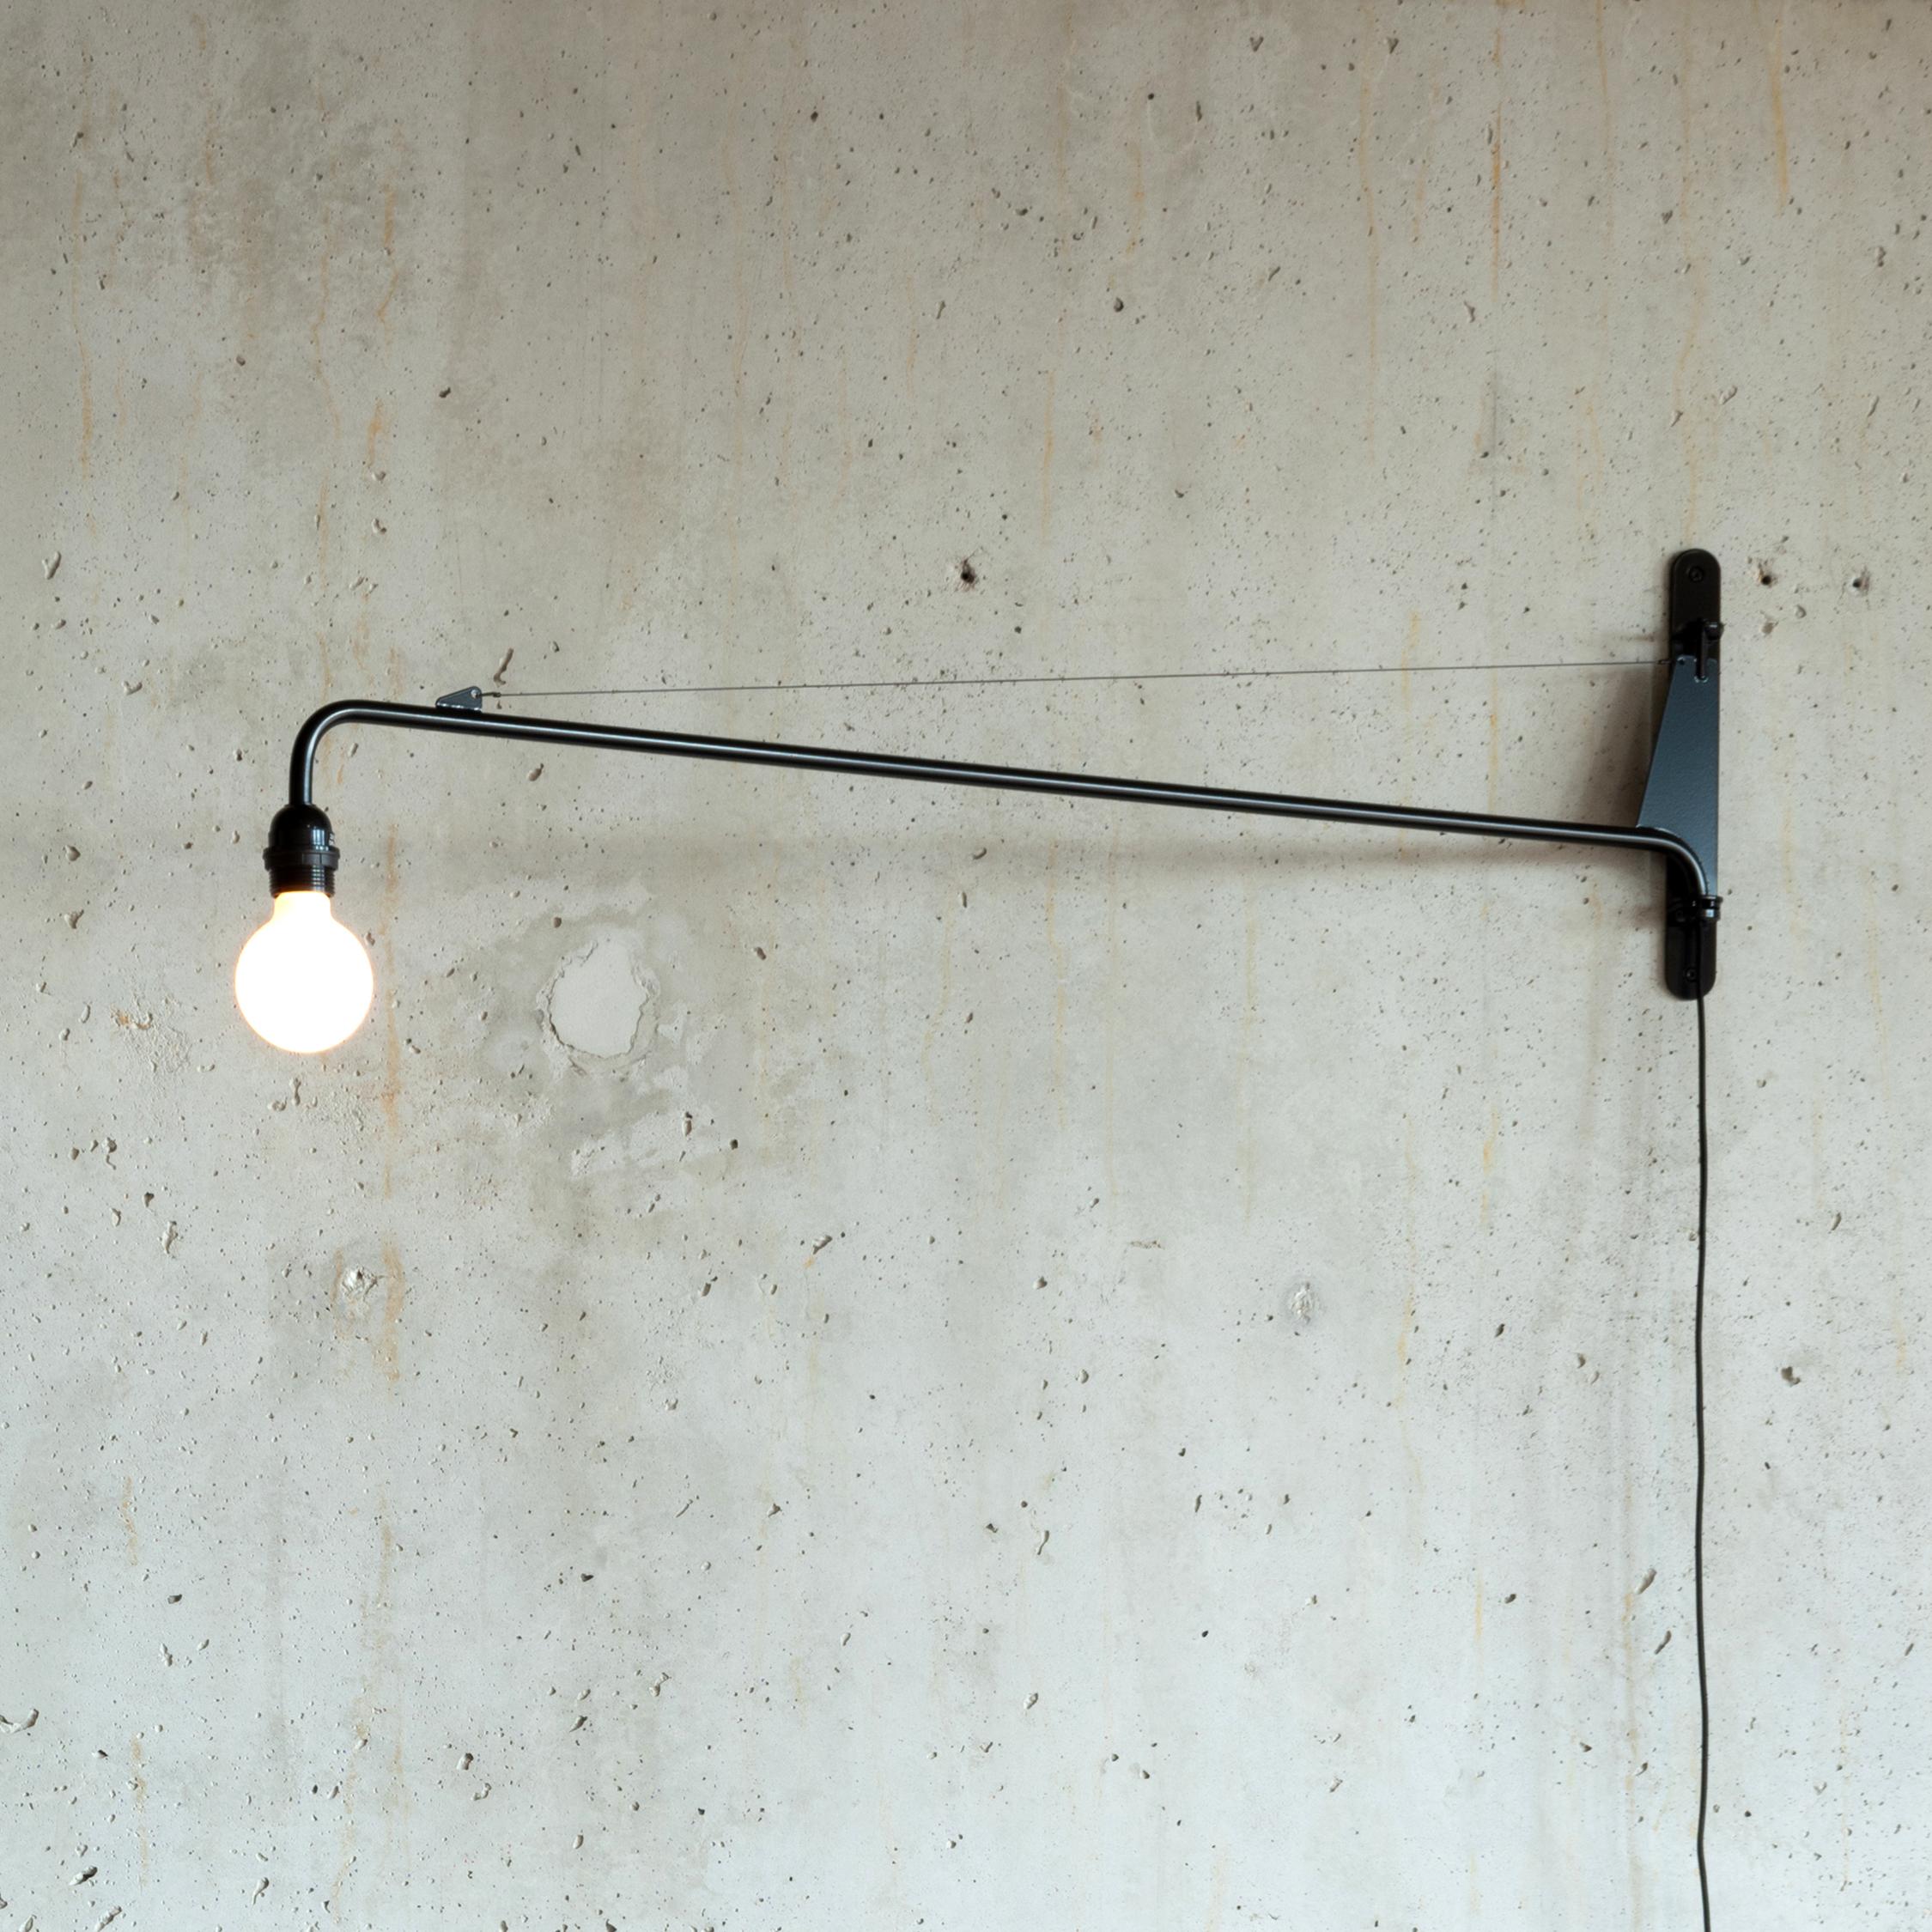 Industrial and minimalistic wall lamp designed by Jean Prouvé and produced by Vitra. Swing (pivoting) arm with black powder coating and light bulb all in excellent original condition with only very light traces of use. The lamp is controlled by a